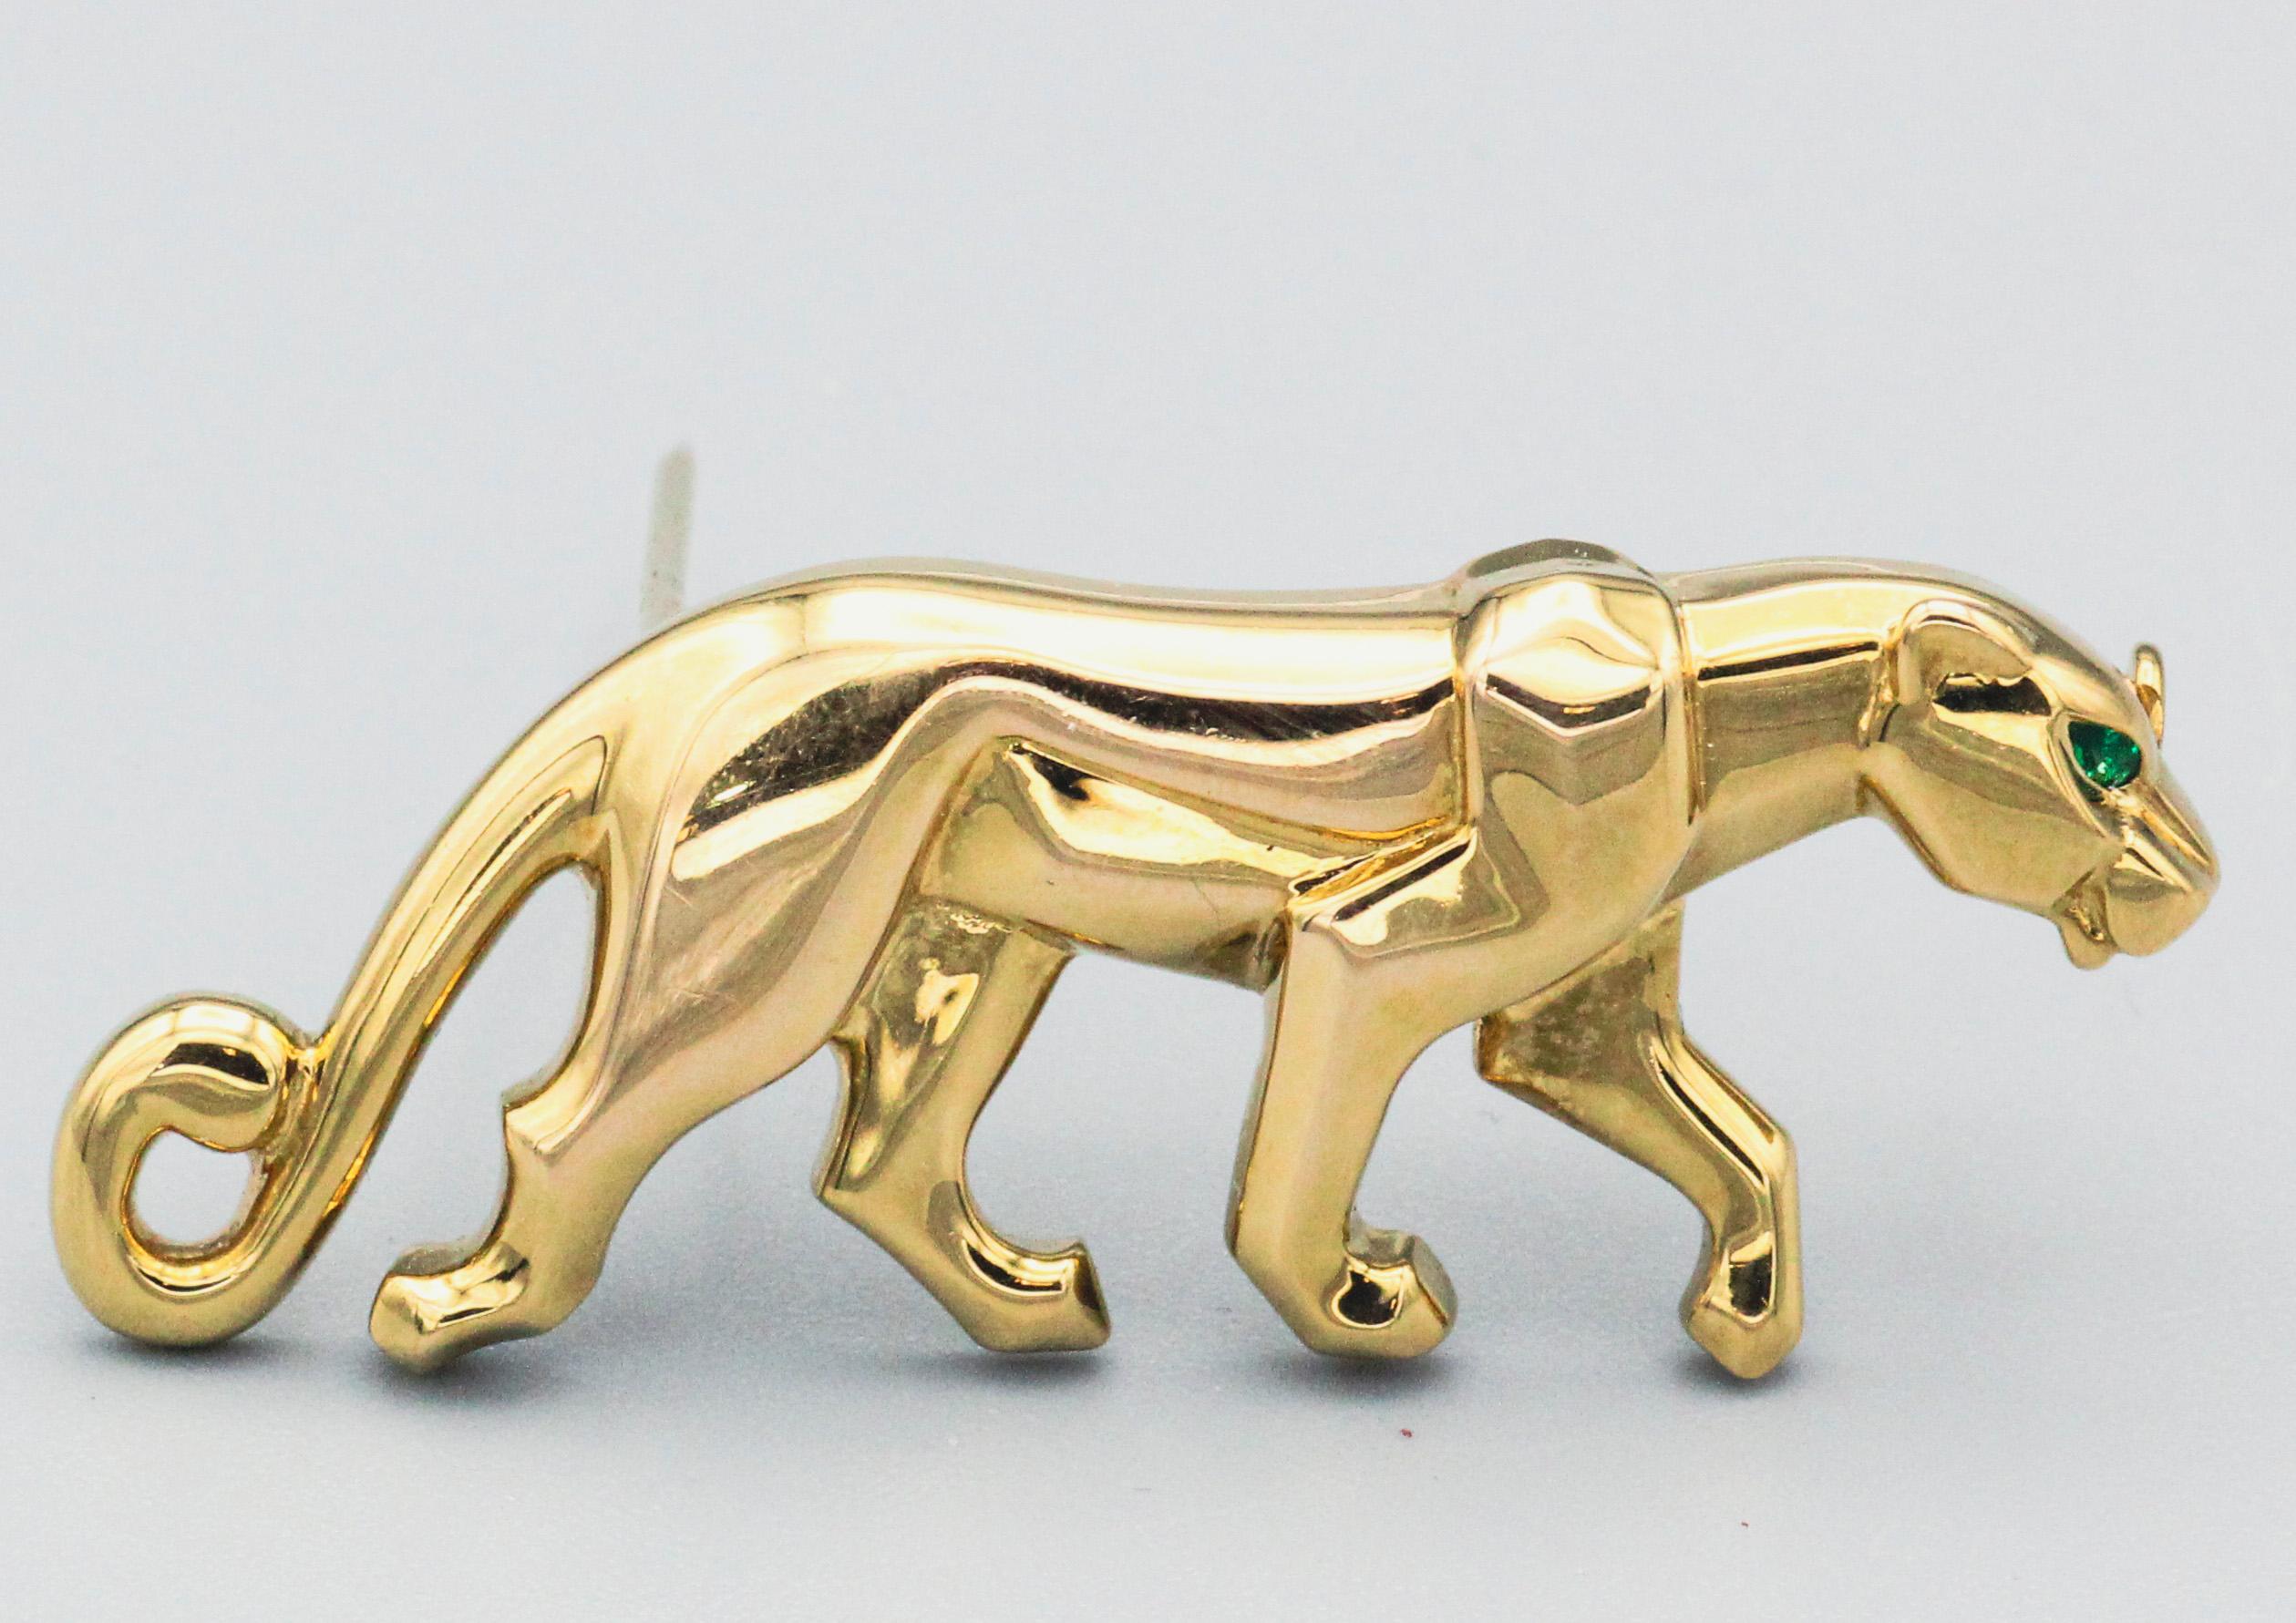 Unleash the Enchantress: A Cartier Panthère Emerald Onyx Gold Prowling Panther Brooch

Embrace the allure of the wild with this captivating Cartier Panthère Emerald Onyx Gold Prowling Panther Brooch. This exquisite piece, a true symbol of Cartier's